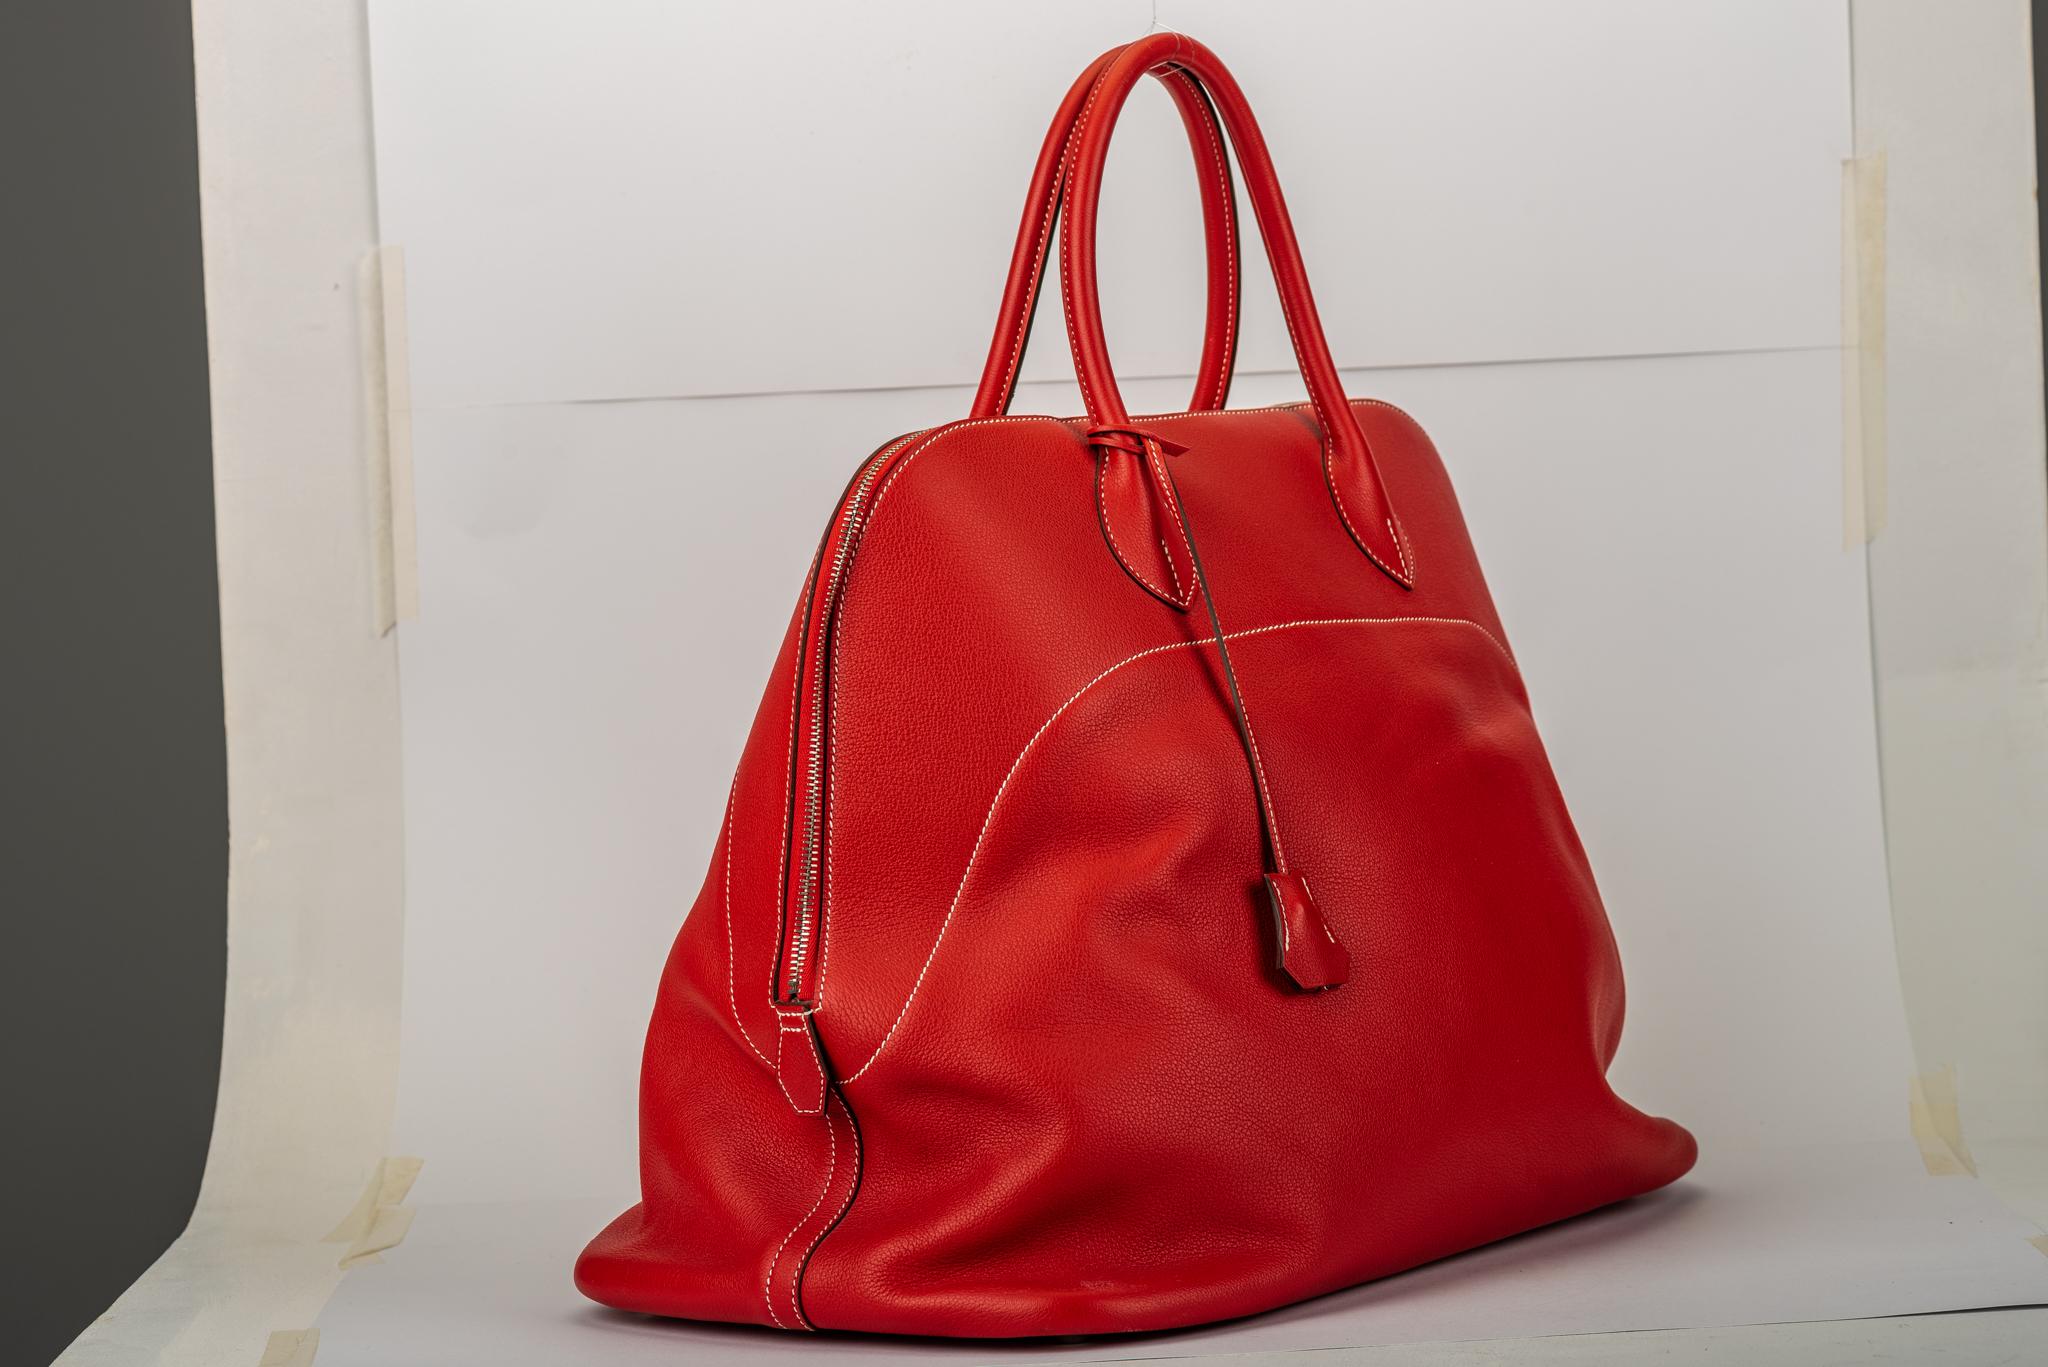 Hermes rare large bolide voyager 45cm in red sikkim leather with contrast white stitching and palladium hardware. The interior is lined in herringbone toile, which makes the bag look more relaxed and lightweight. Handle drop 4